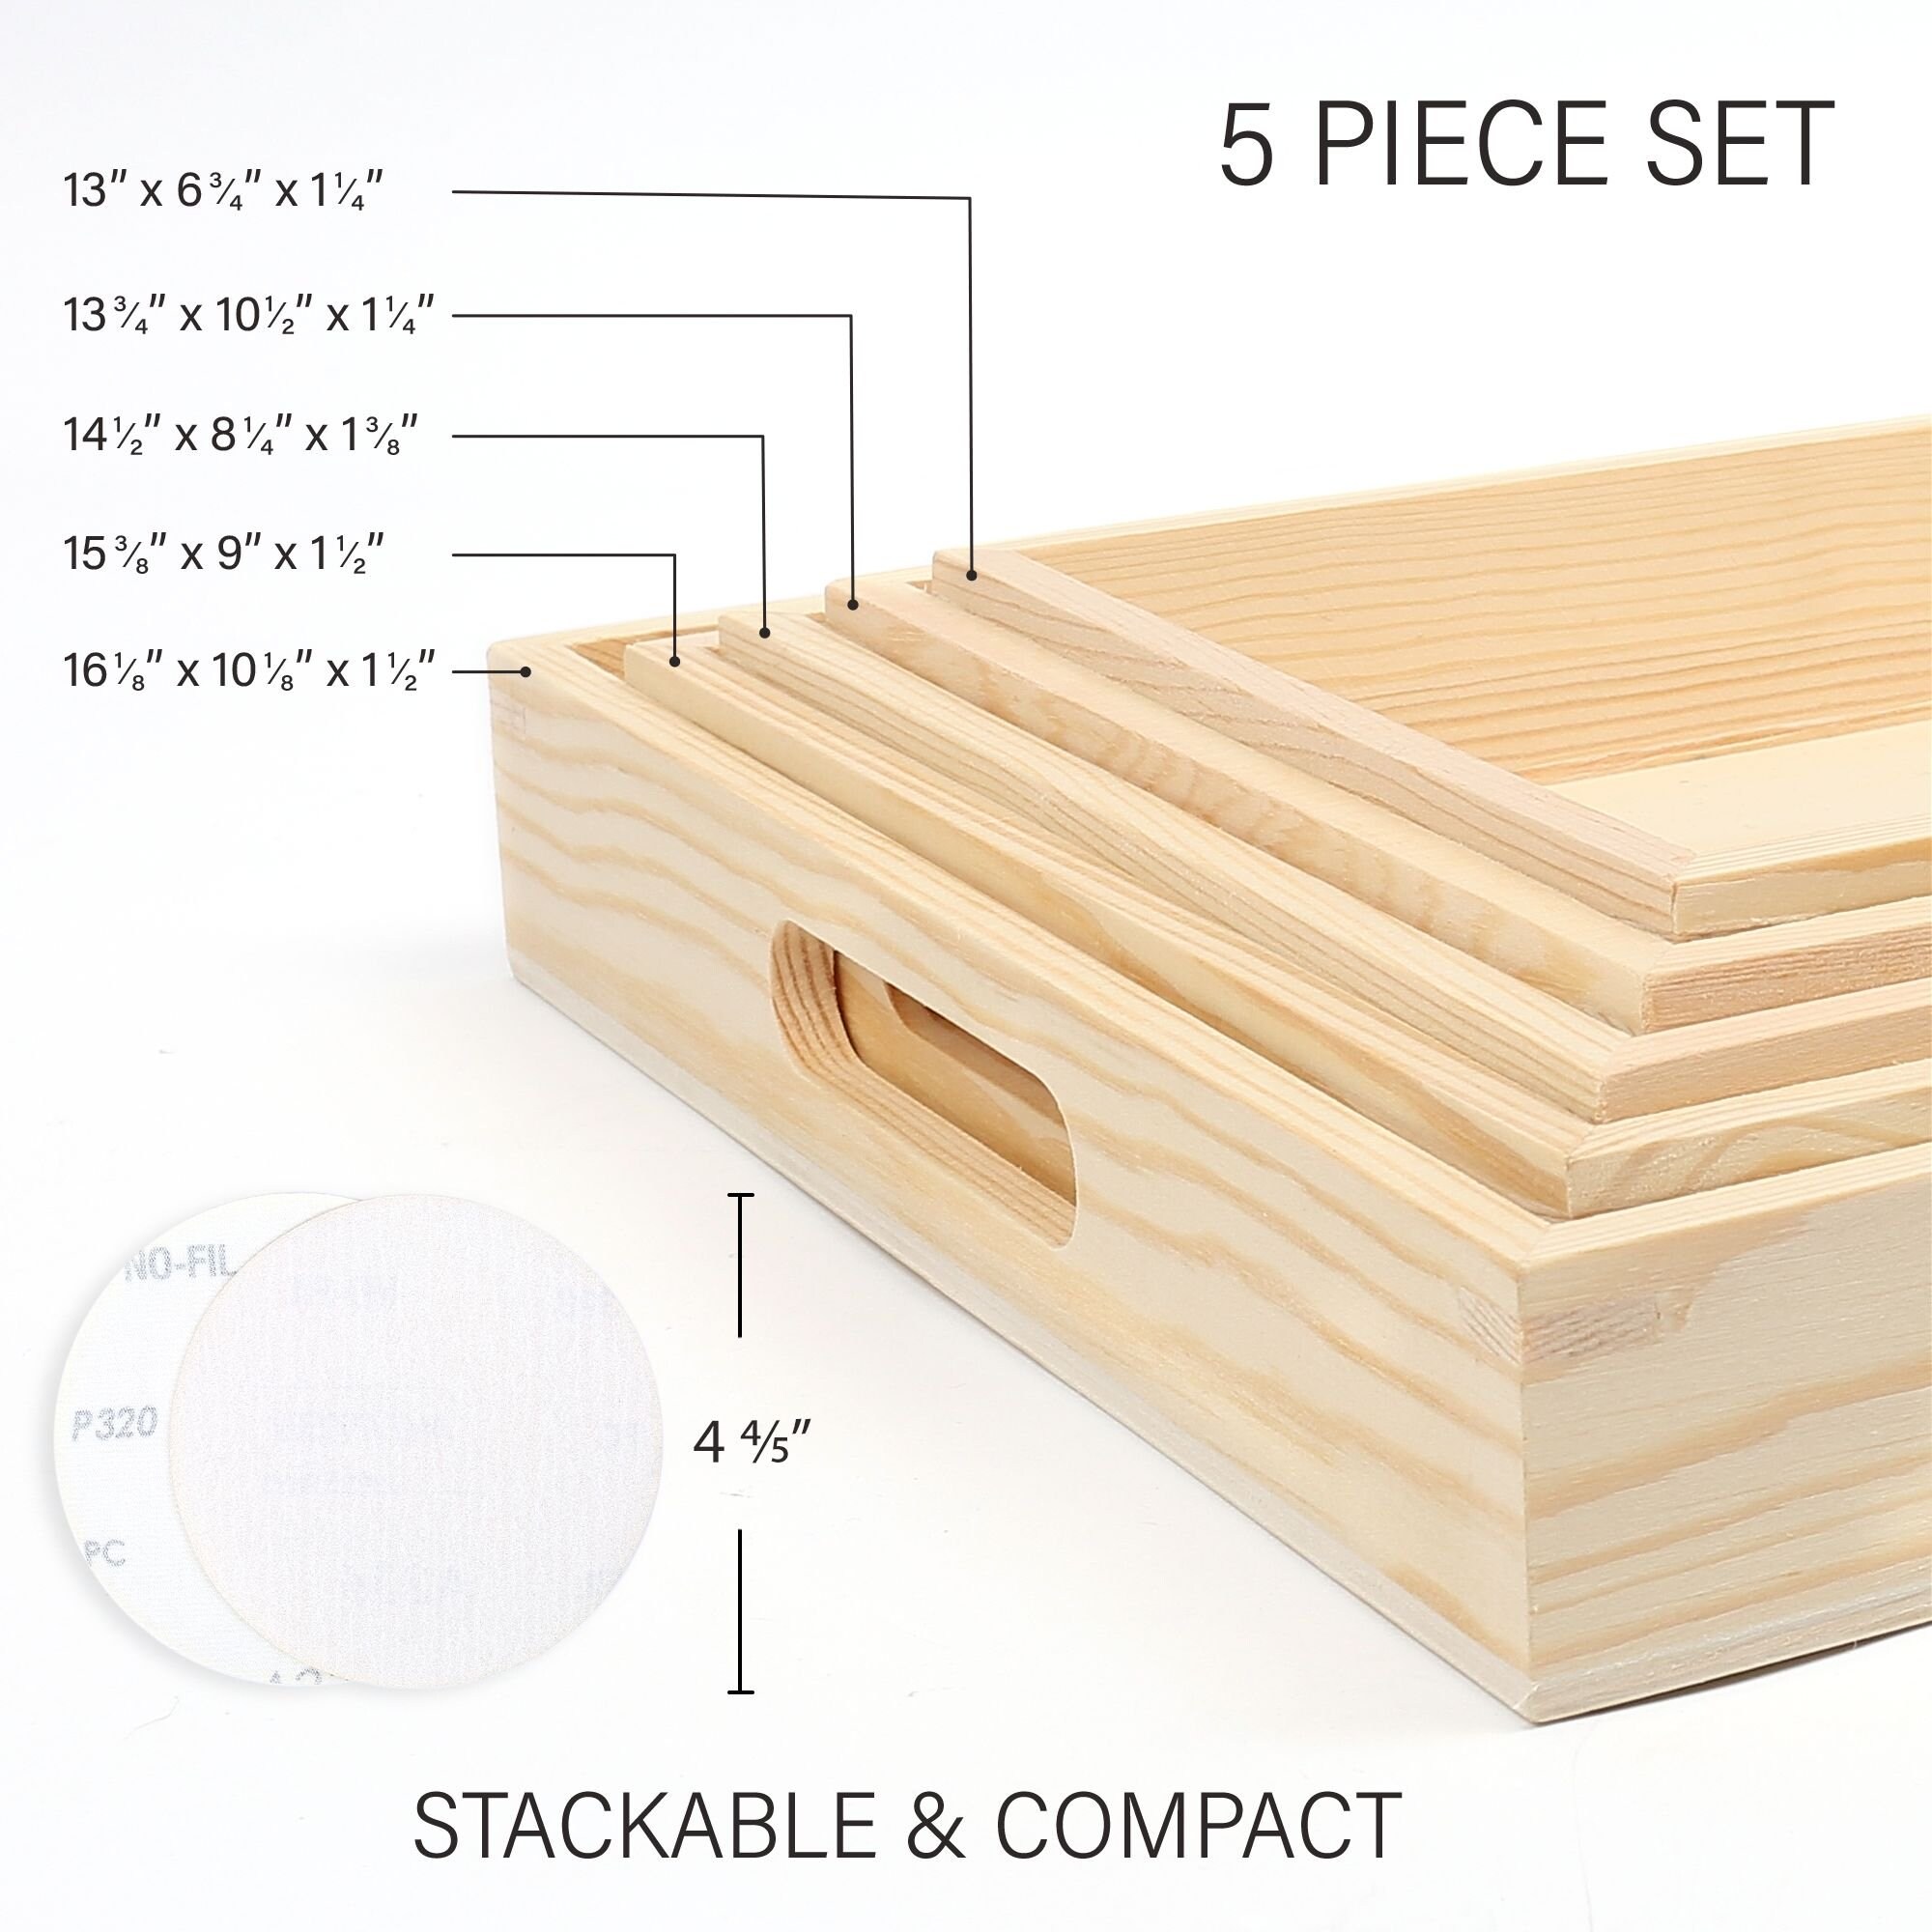 Wooden Nested Serving Trays - Set of 5 Unfinished Square Trays